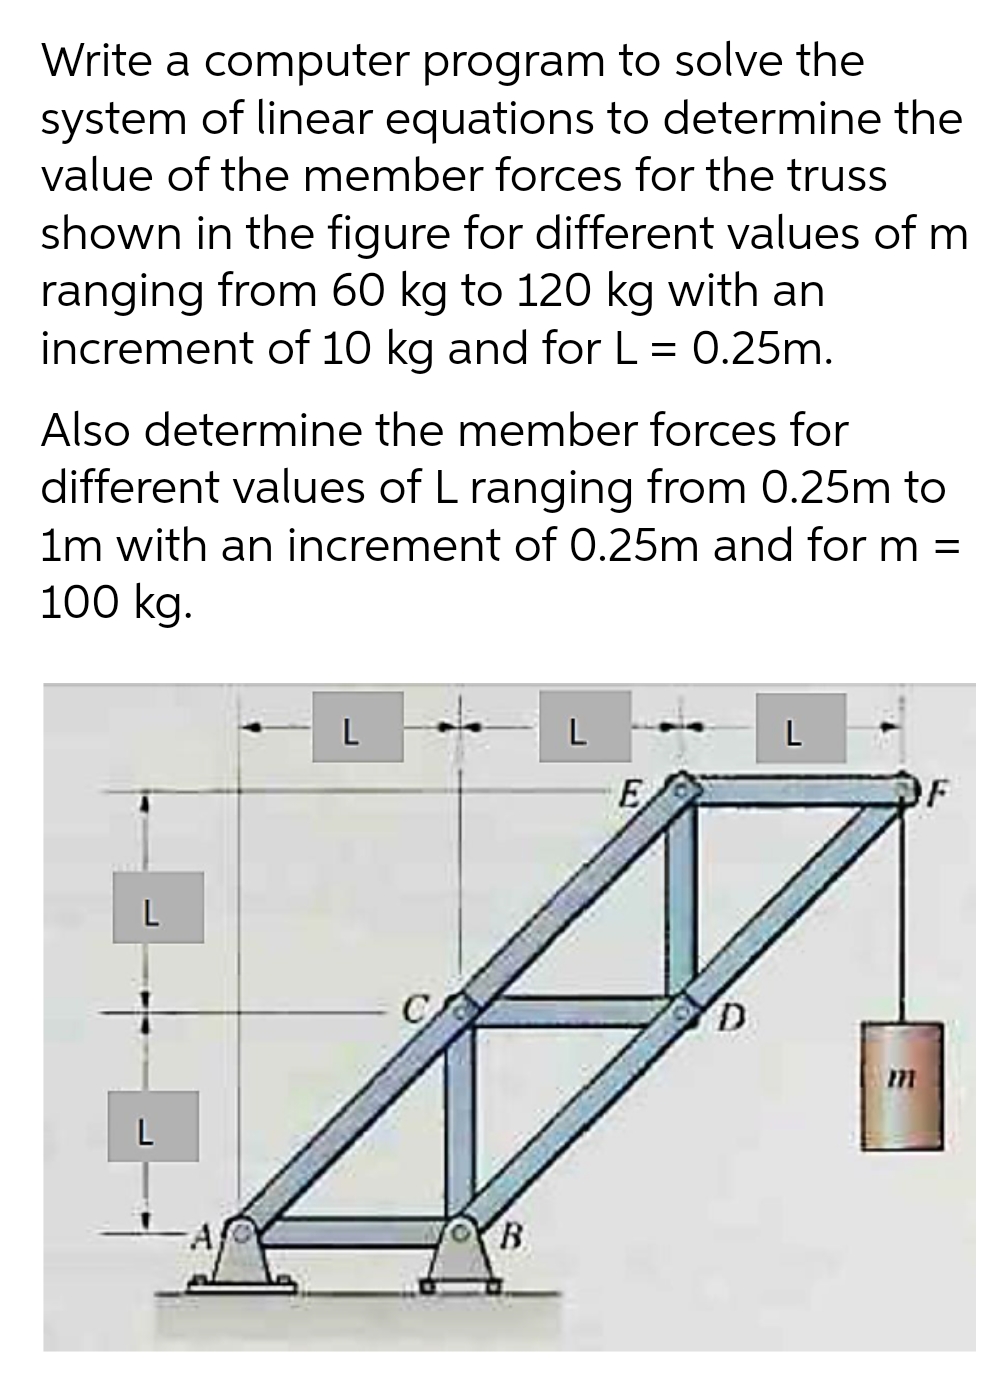 Write a computer program to solve the
system of linear equations to determine the
value of the member forces for the truss
shown in the figure for different values of m
ranging from 60 kg to 120 kg with an
increment of 10 kg and for L = 0.25m.
Also determine the member forces for
different values of L ranging from 0.25m to
1m with an increment of 0.25m and for m =
100 kg.
L
L
L
E
OF
L
B
